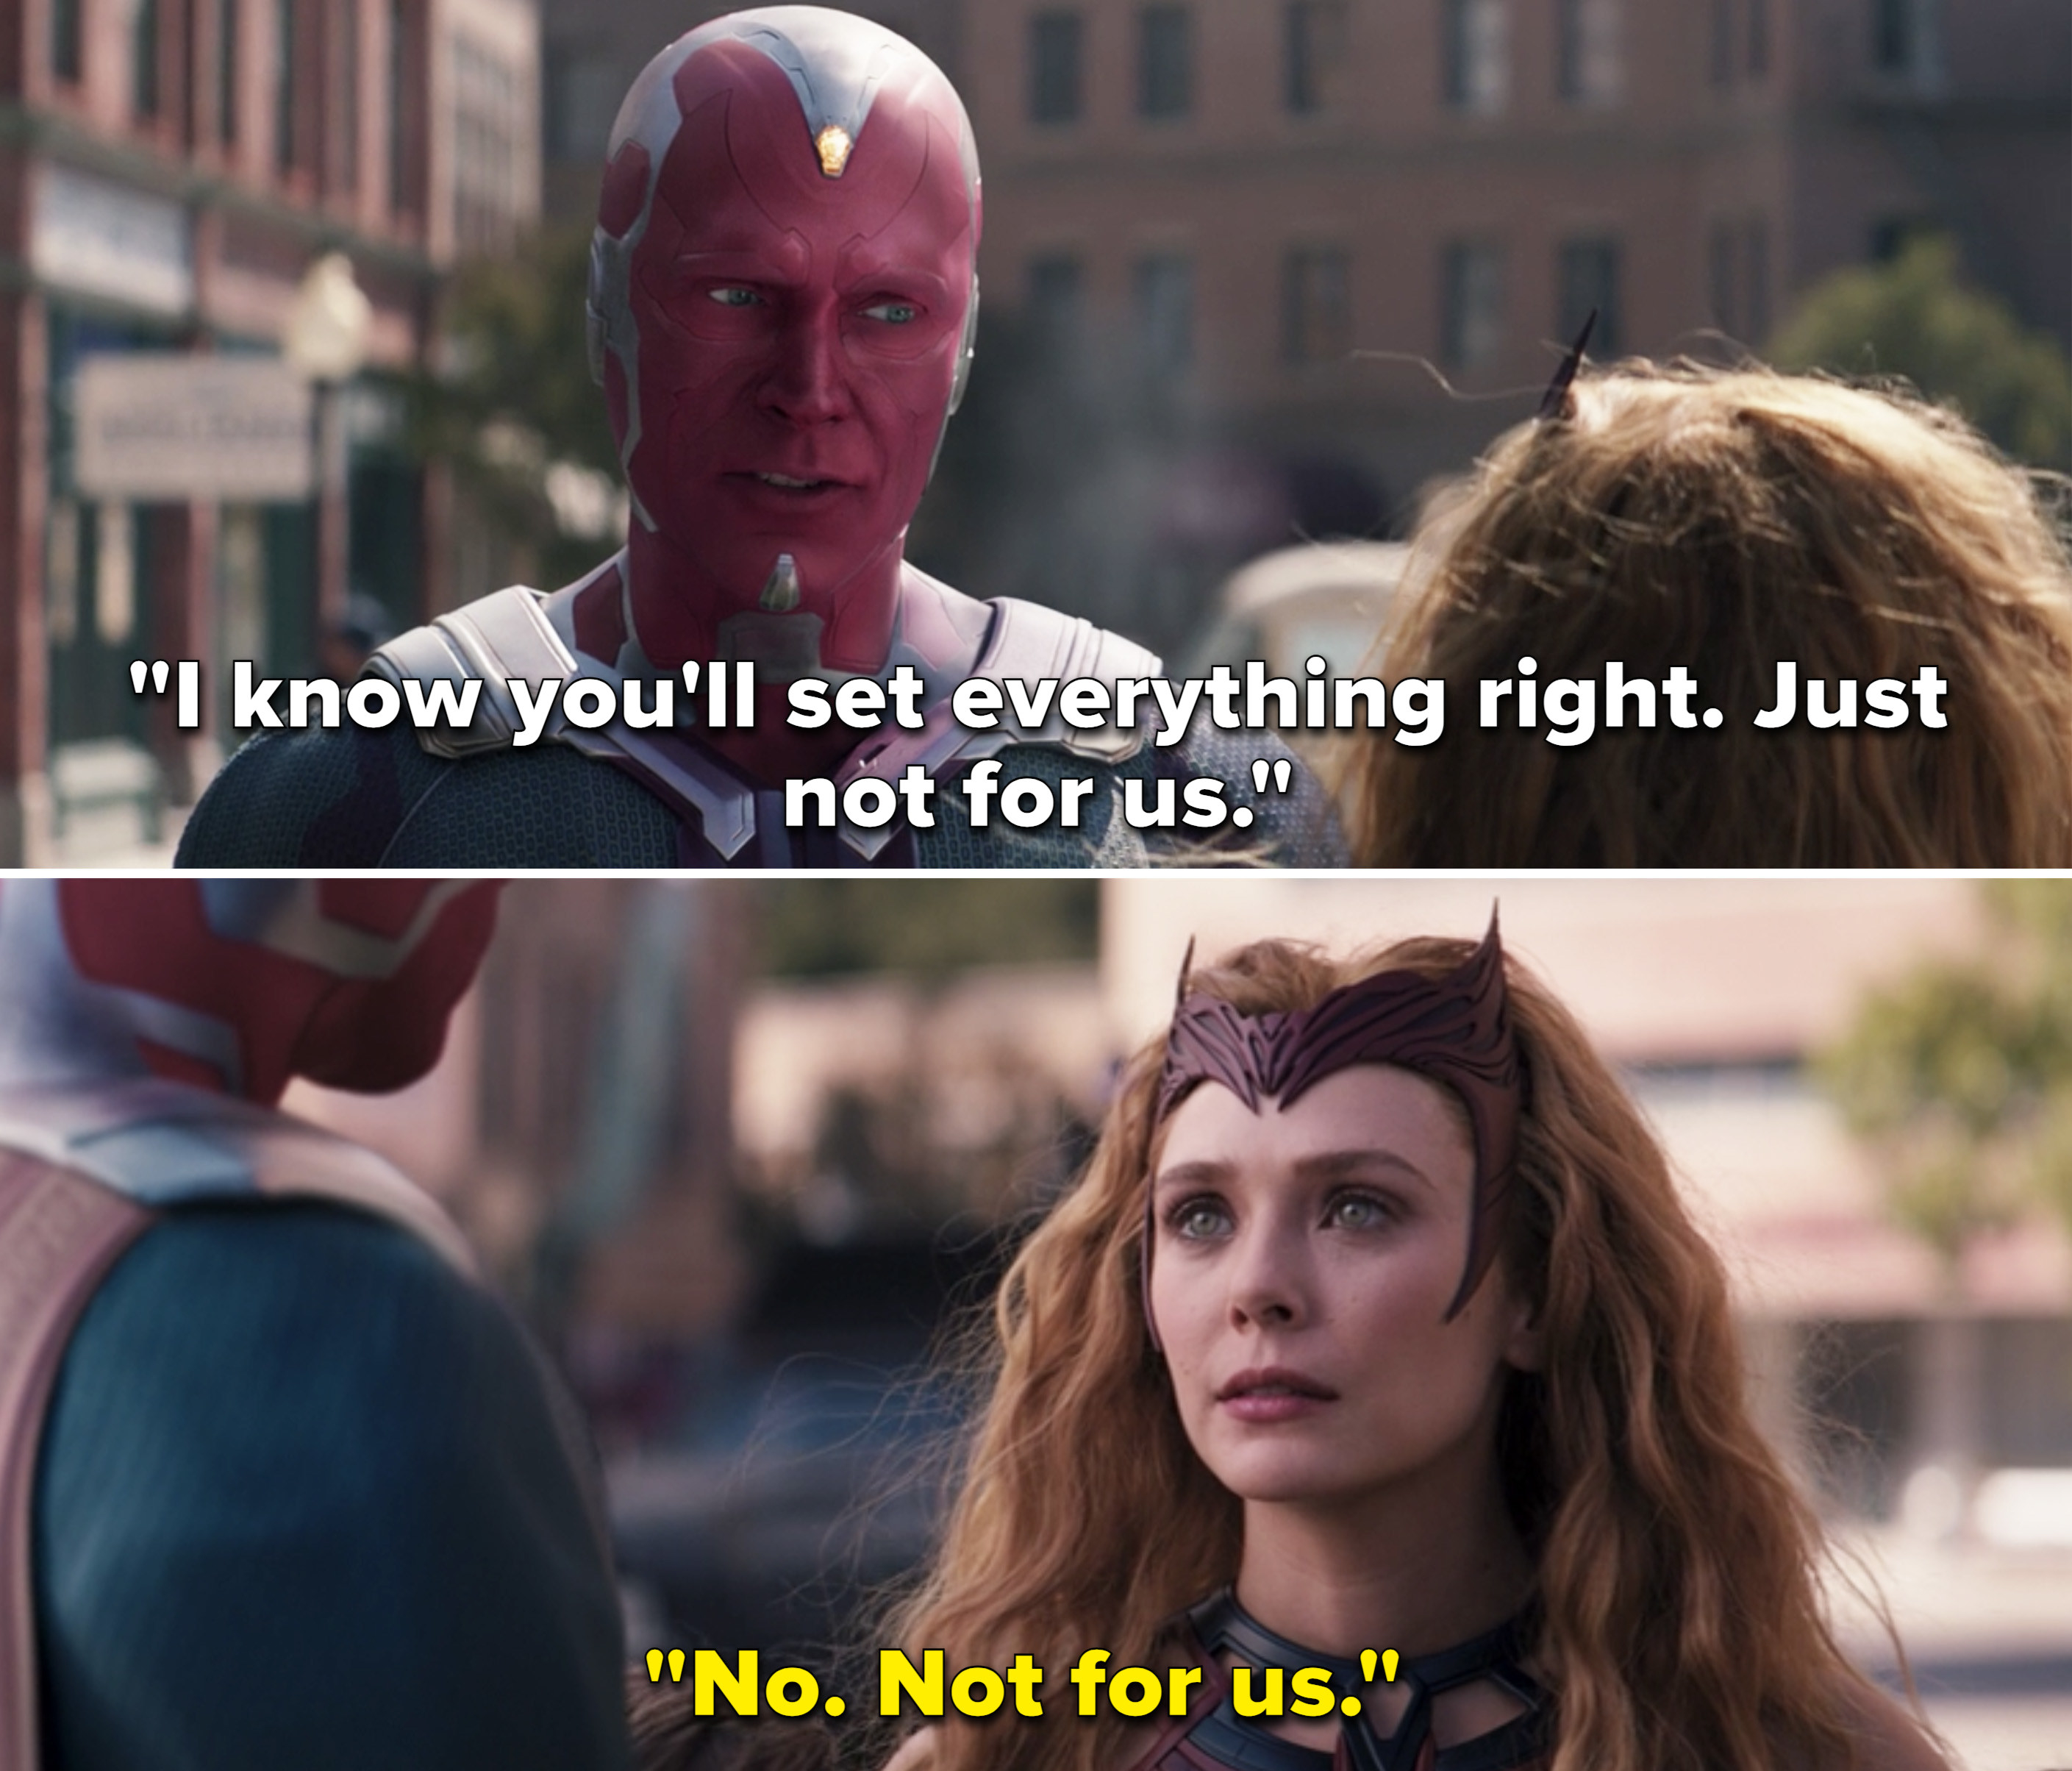 Vision says, &quot;I know you&#x27;ll set everything right. Just not for us,&quot; to which Wanda replies, &quot;No. not for us&quot;